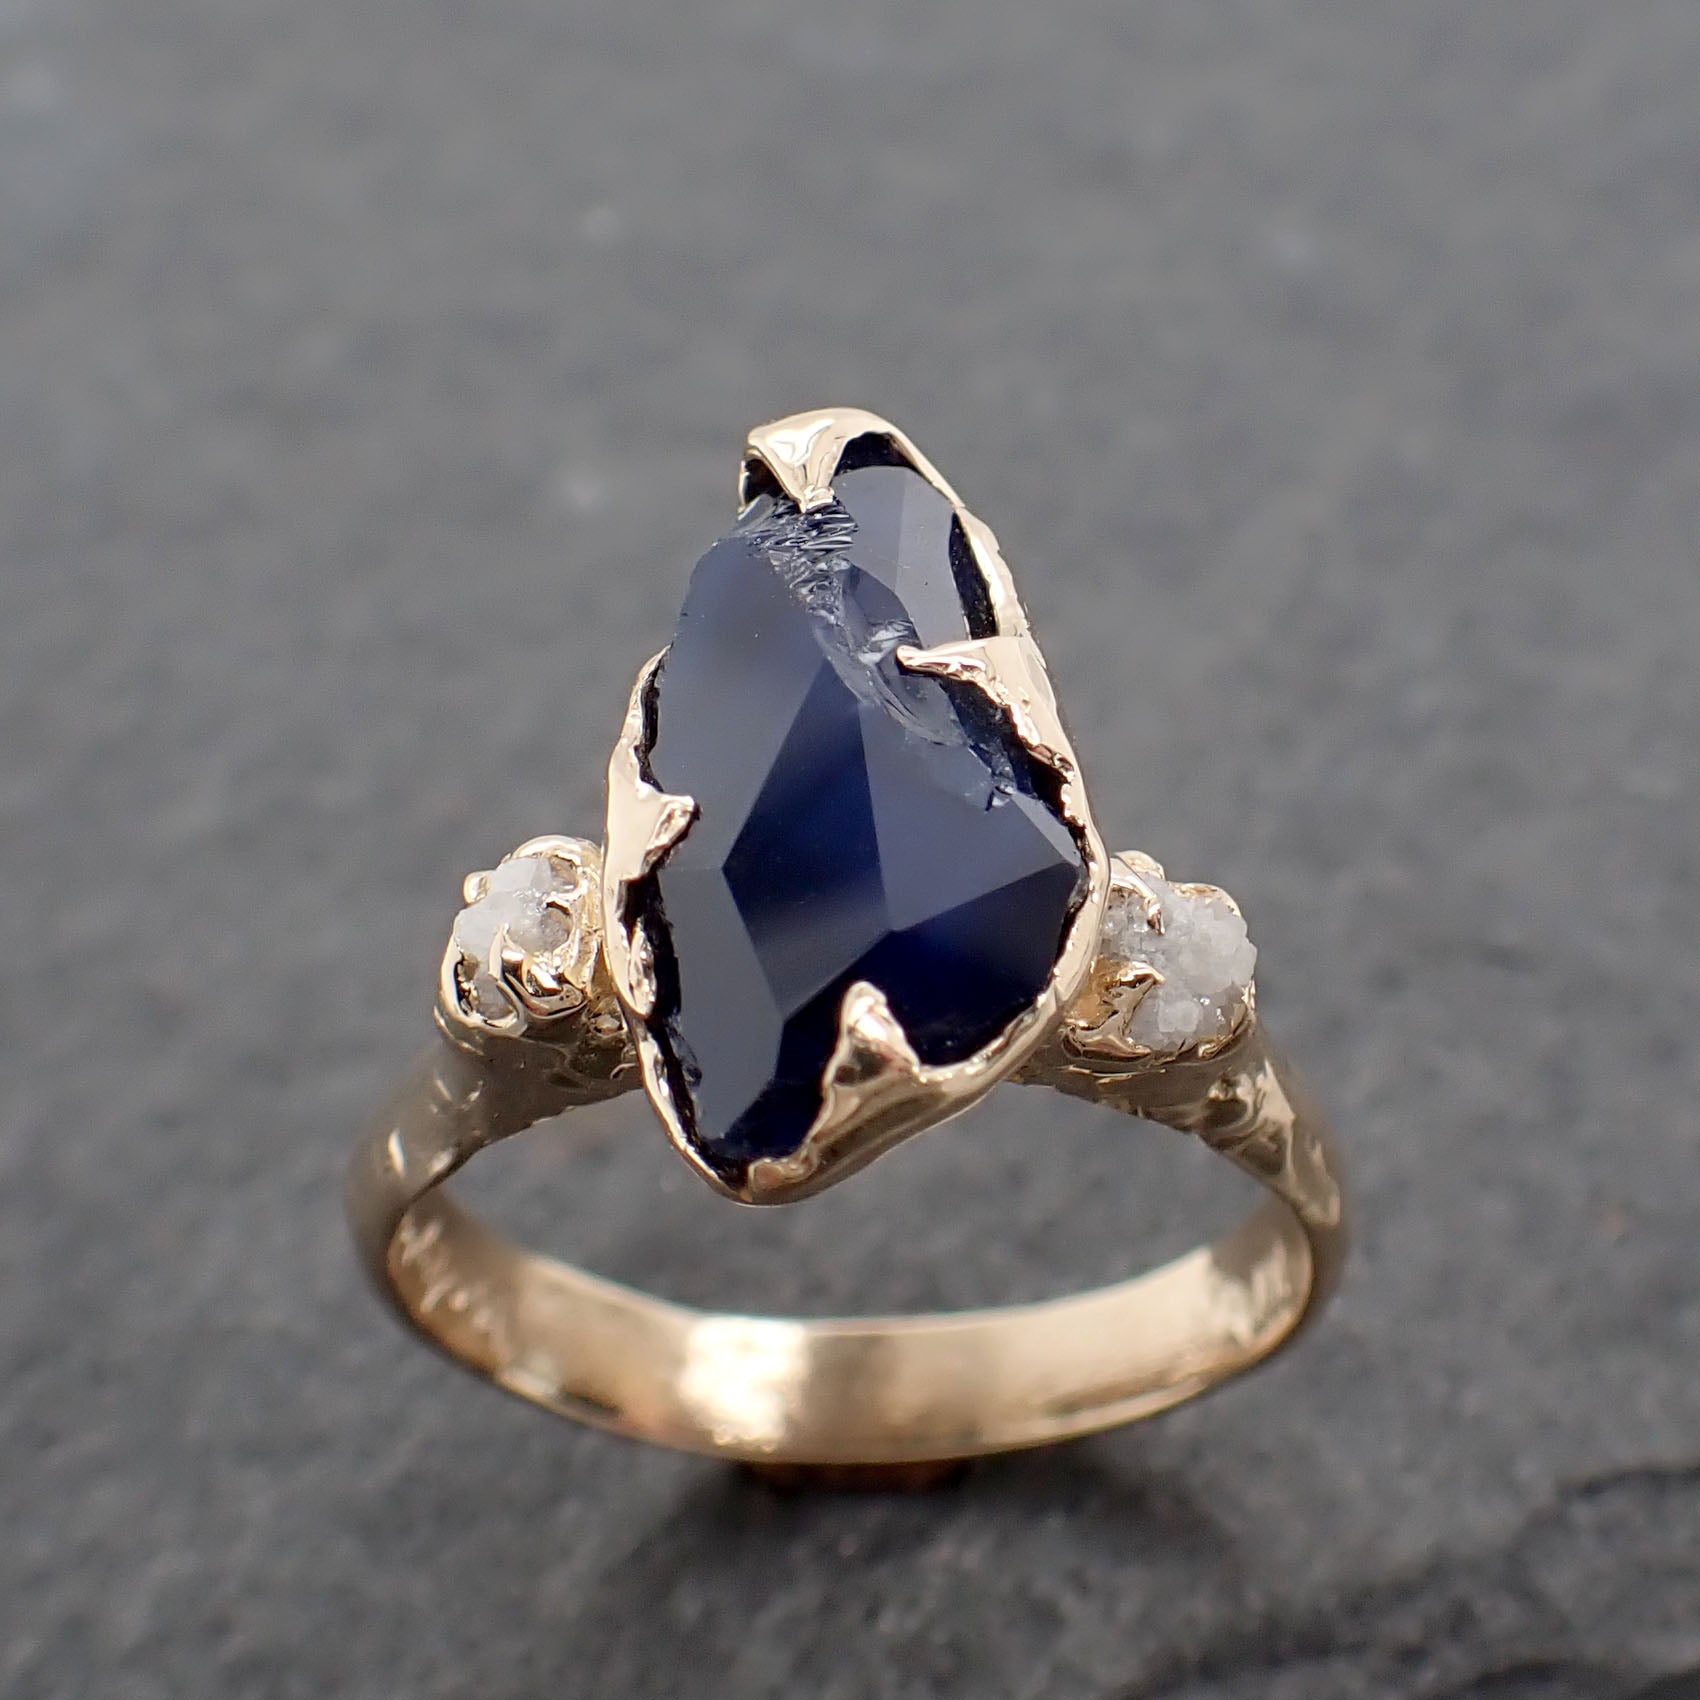 Buy quality Silver 925 royal blue stone ring sr925-105 in Ahmedabad